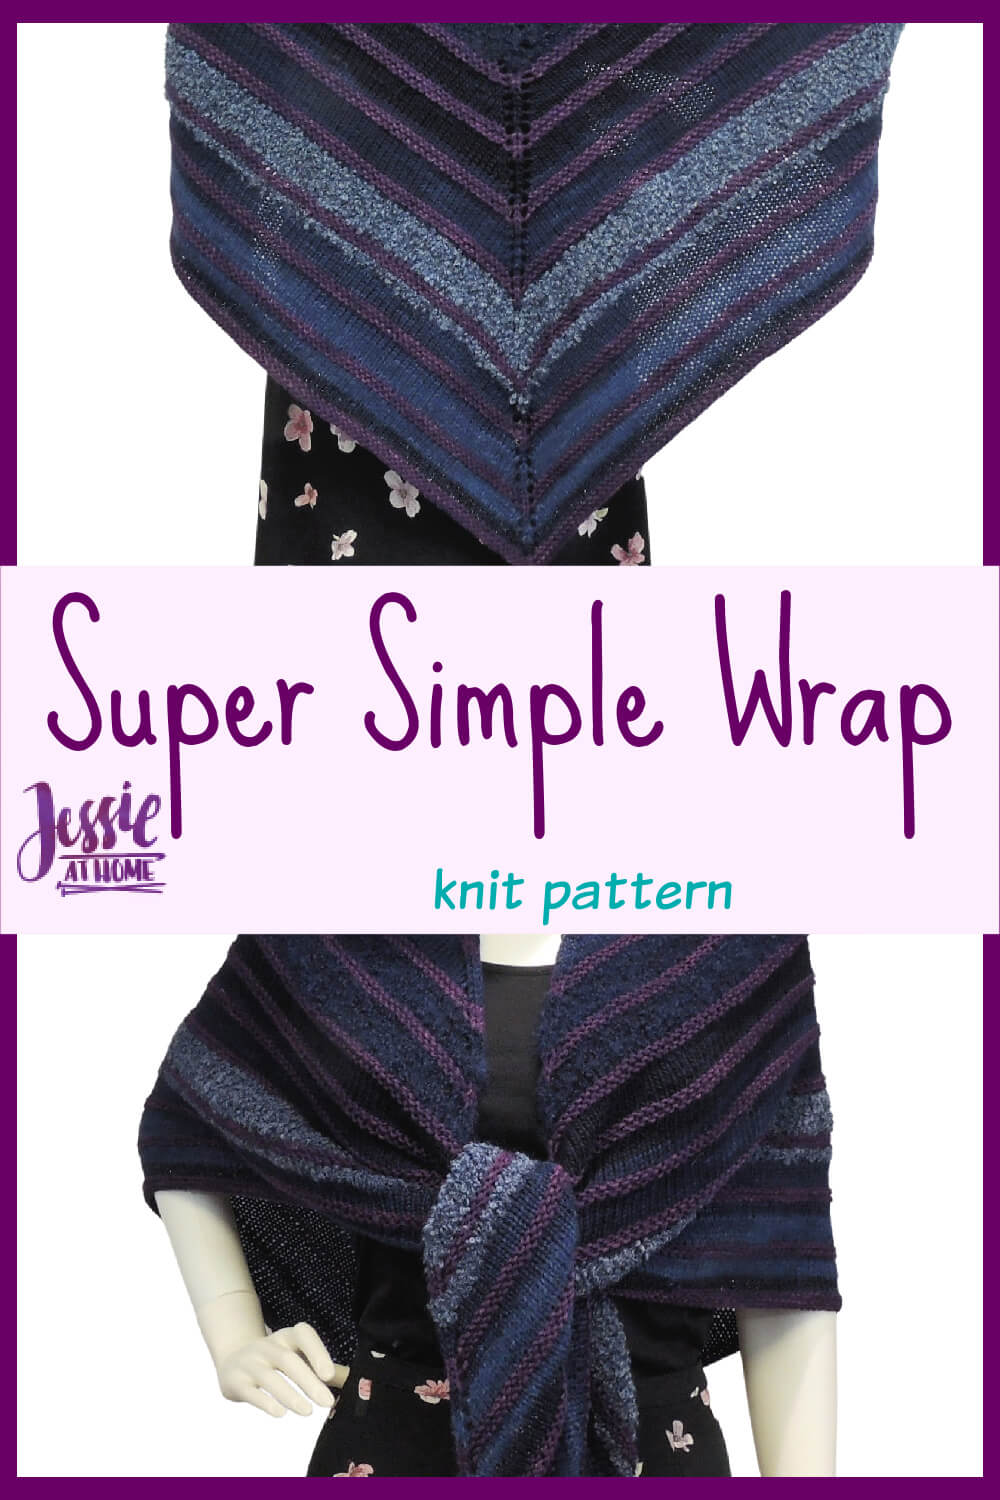 Super Simple Knit Shawl - knit, purl, yarn over, done